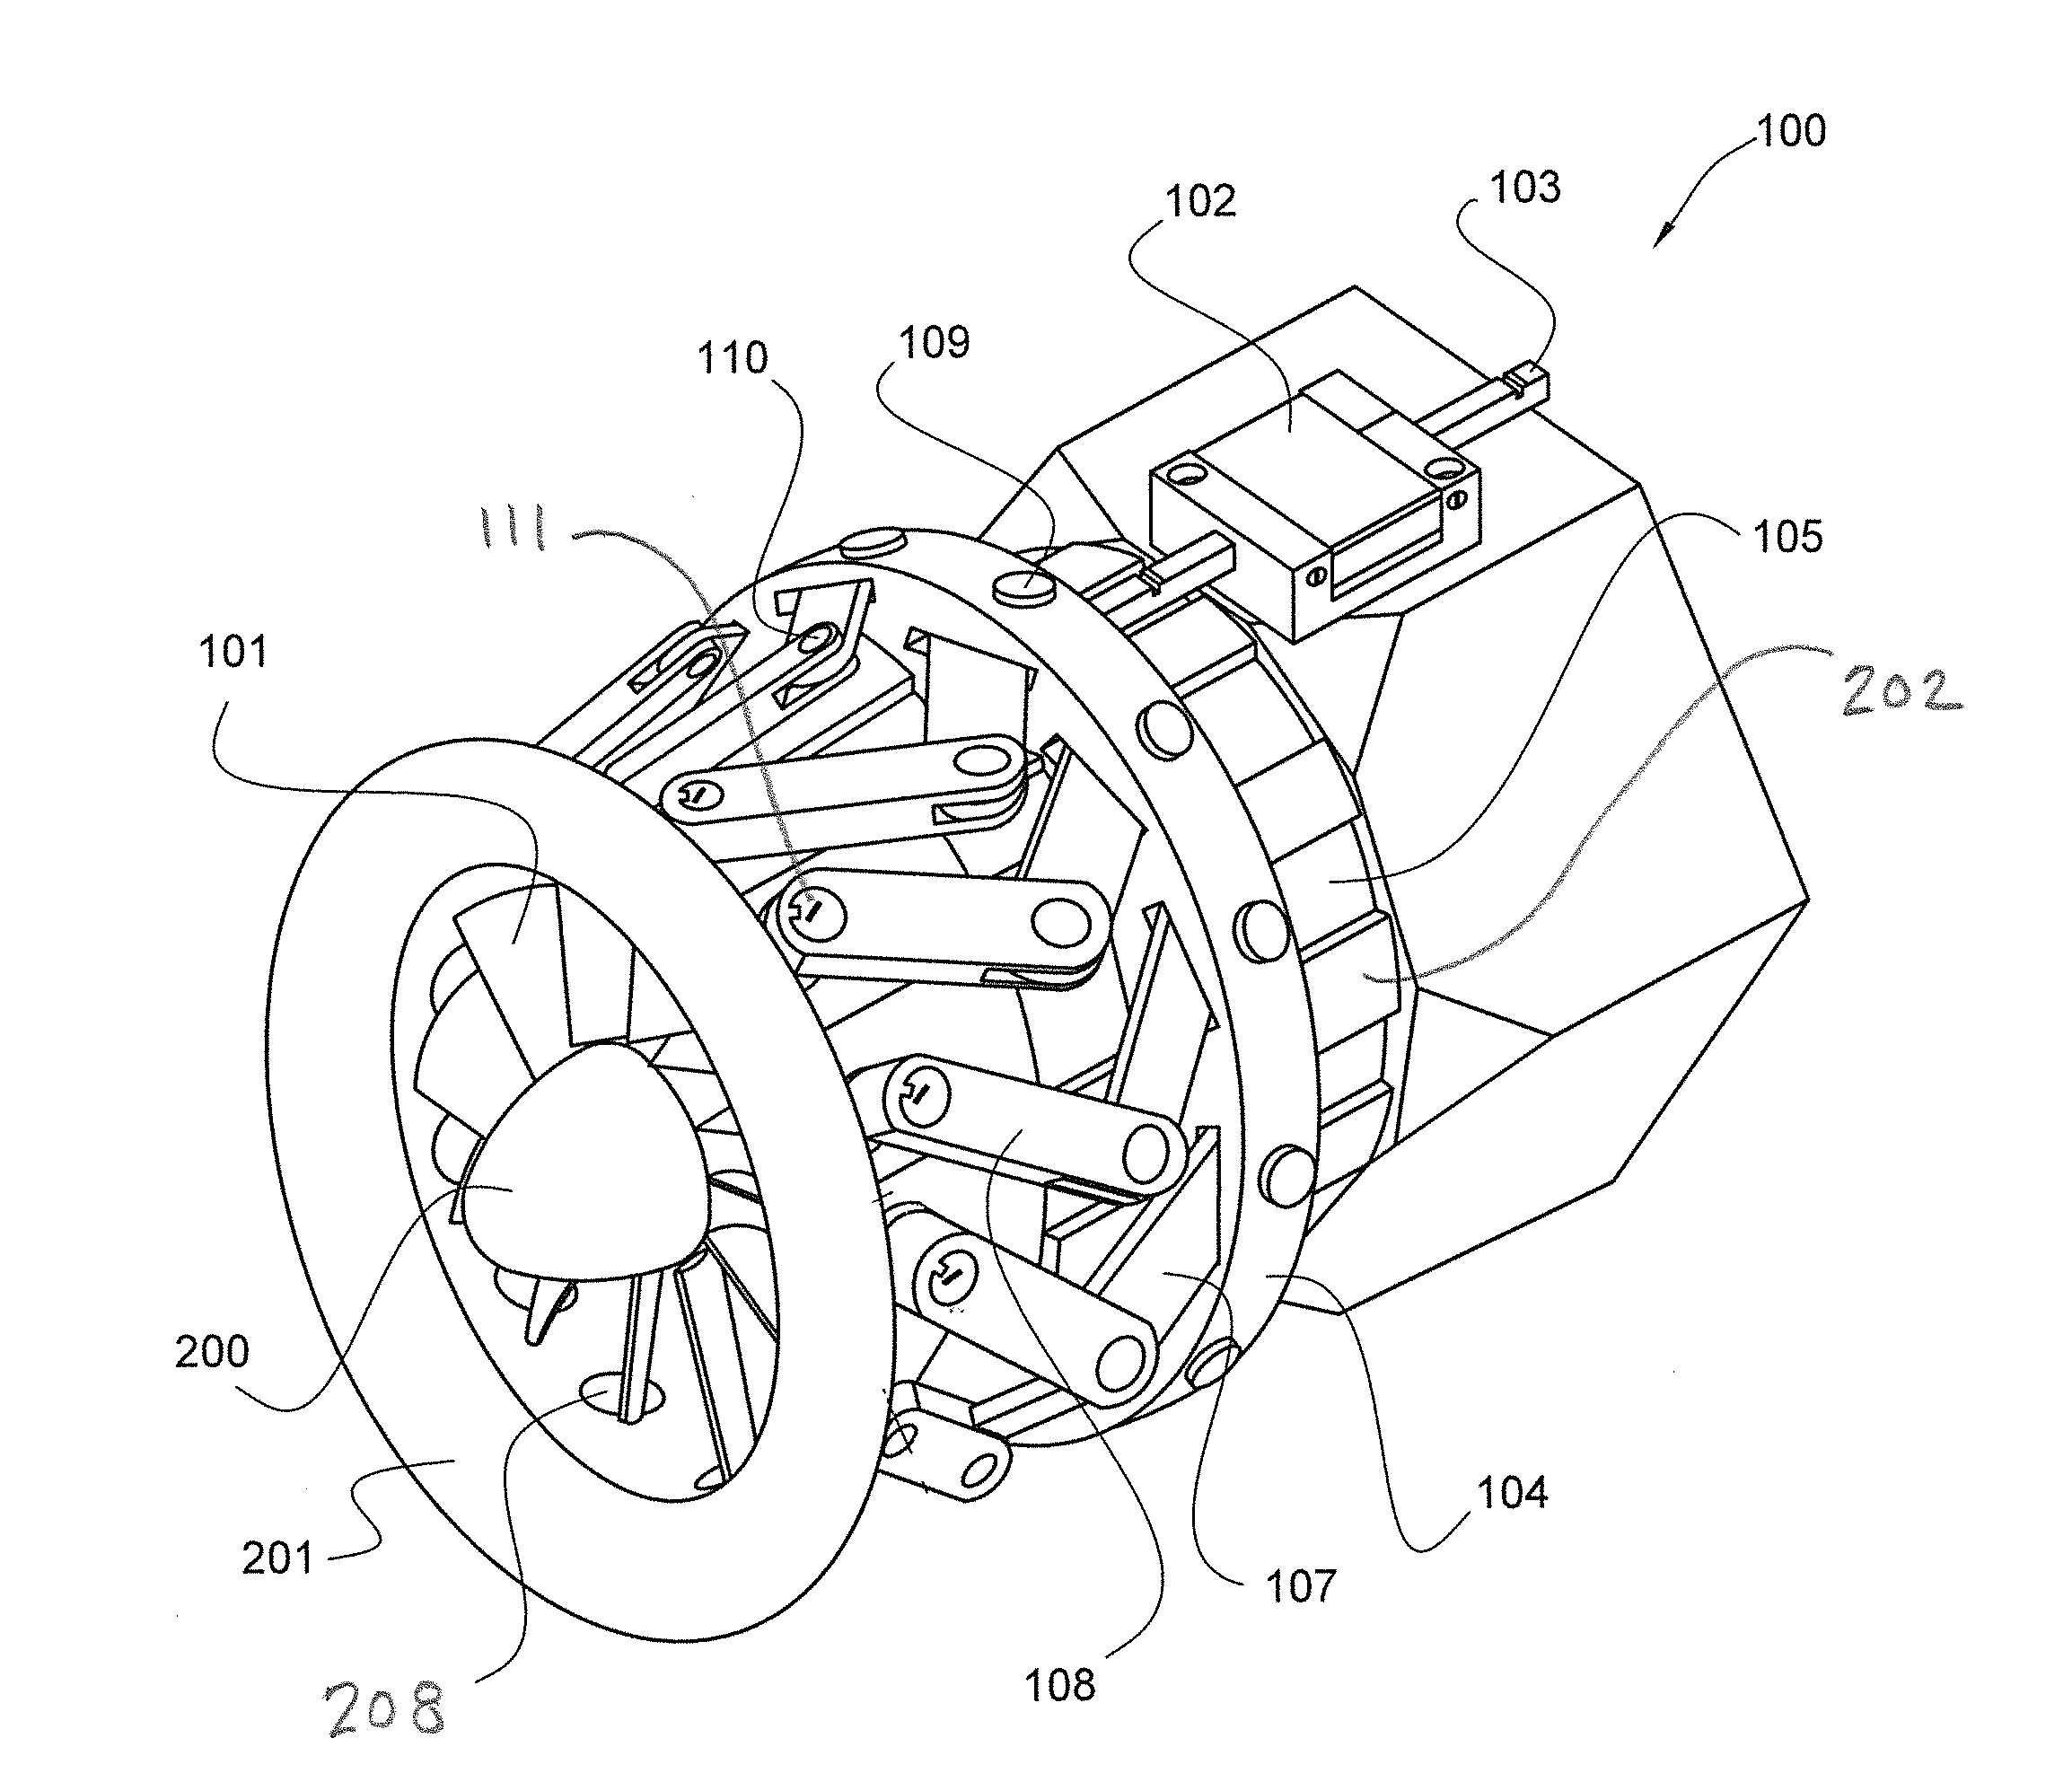 Apparatus and method for rotating fluid controlling vanes in small turbine engines and other applications